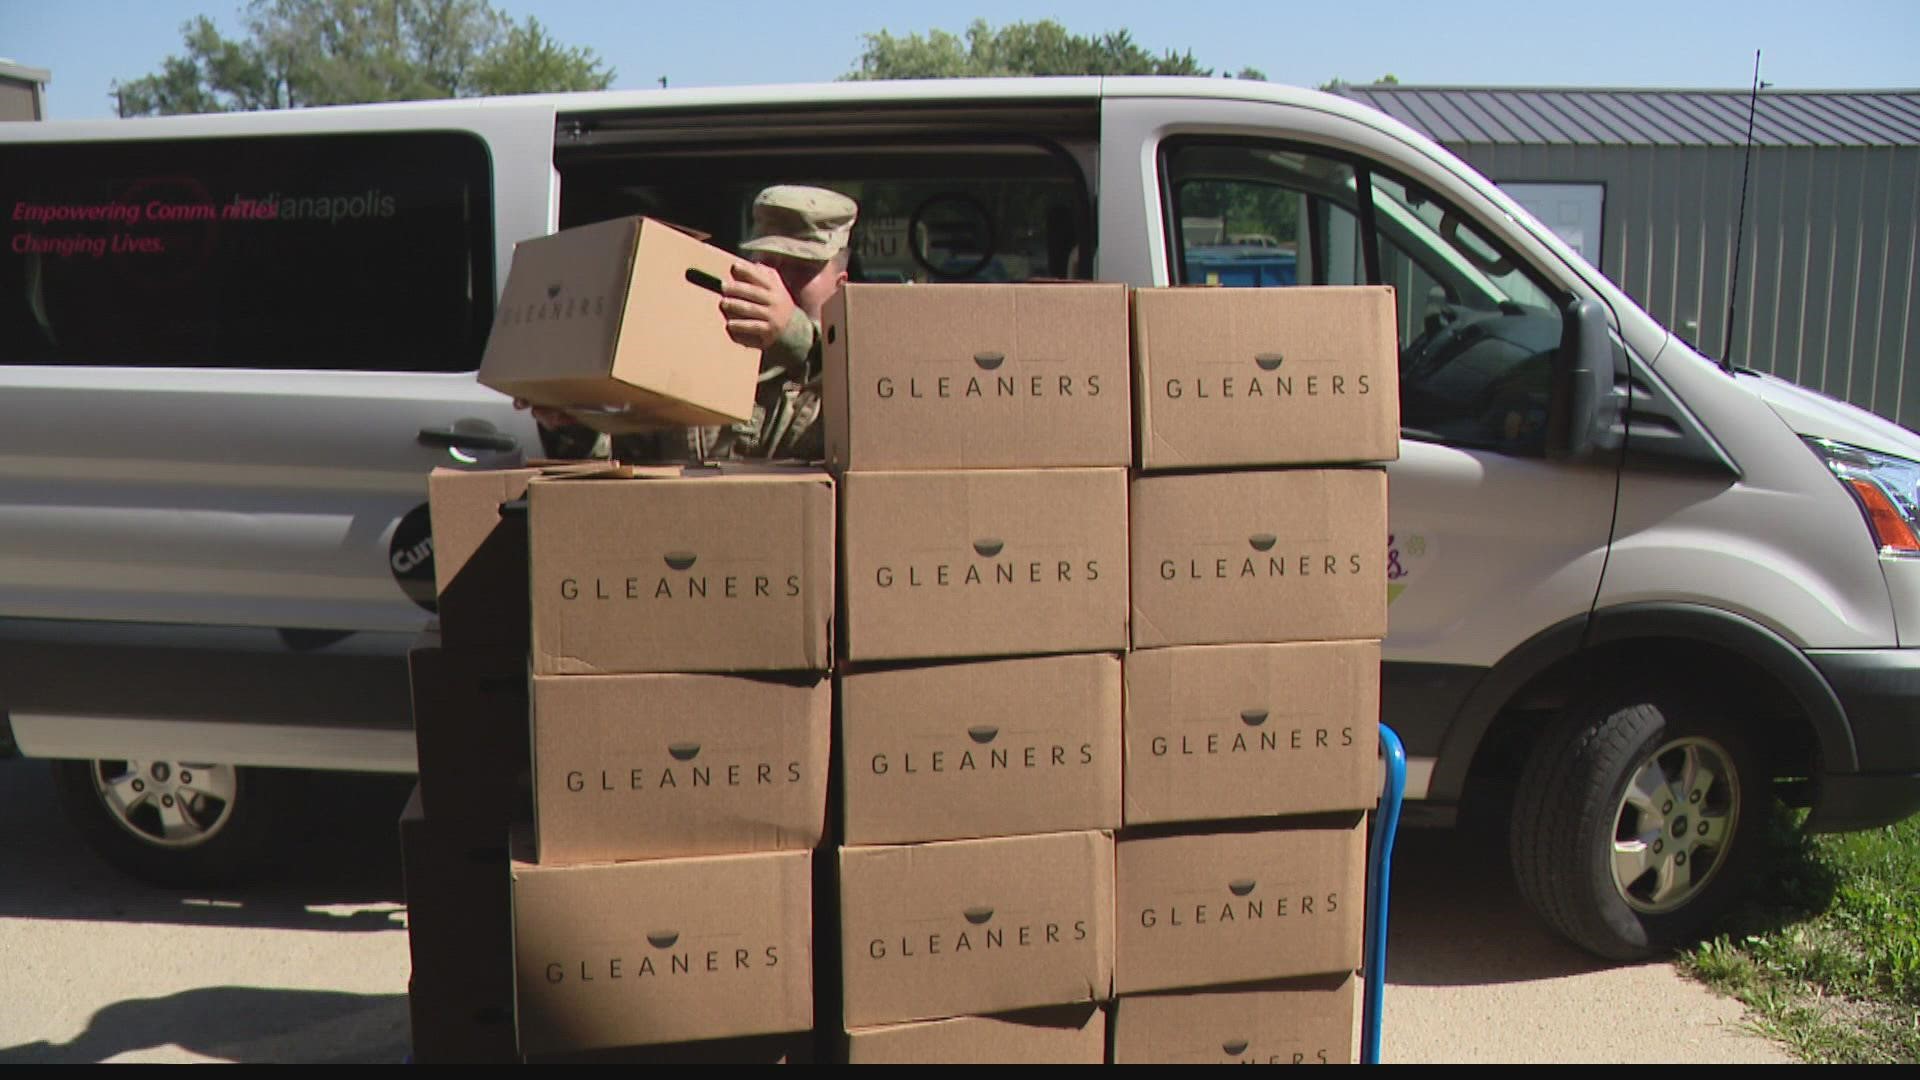 The American Legion and Indianapolis Urban League donated dozens of boxes of food to Afghan evacuees living at Camp Atterbury.